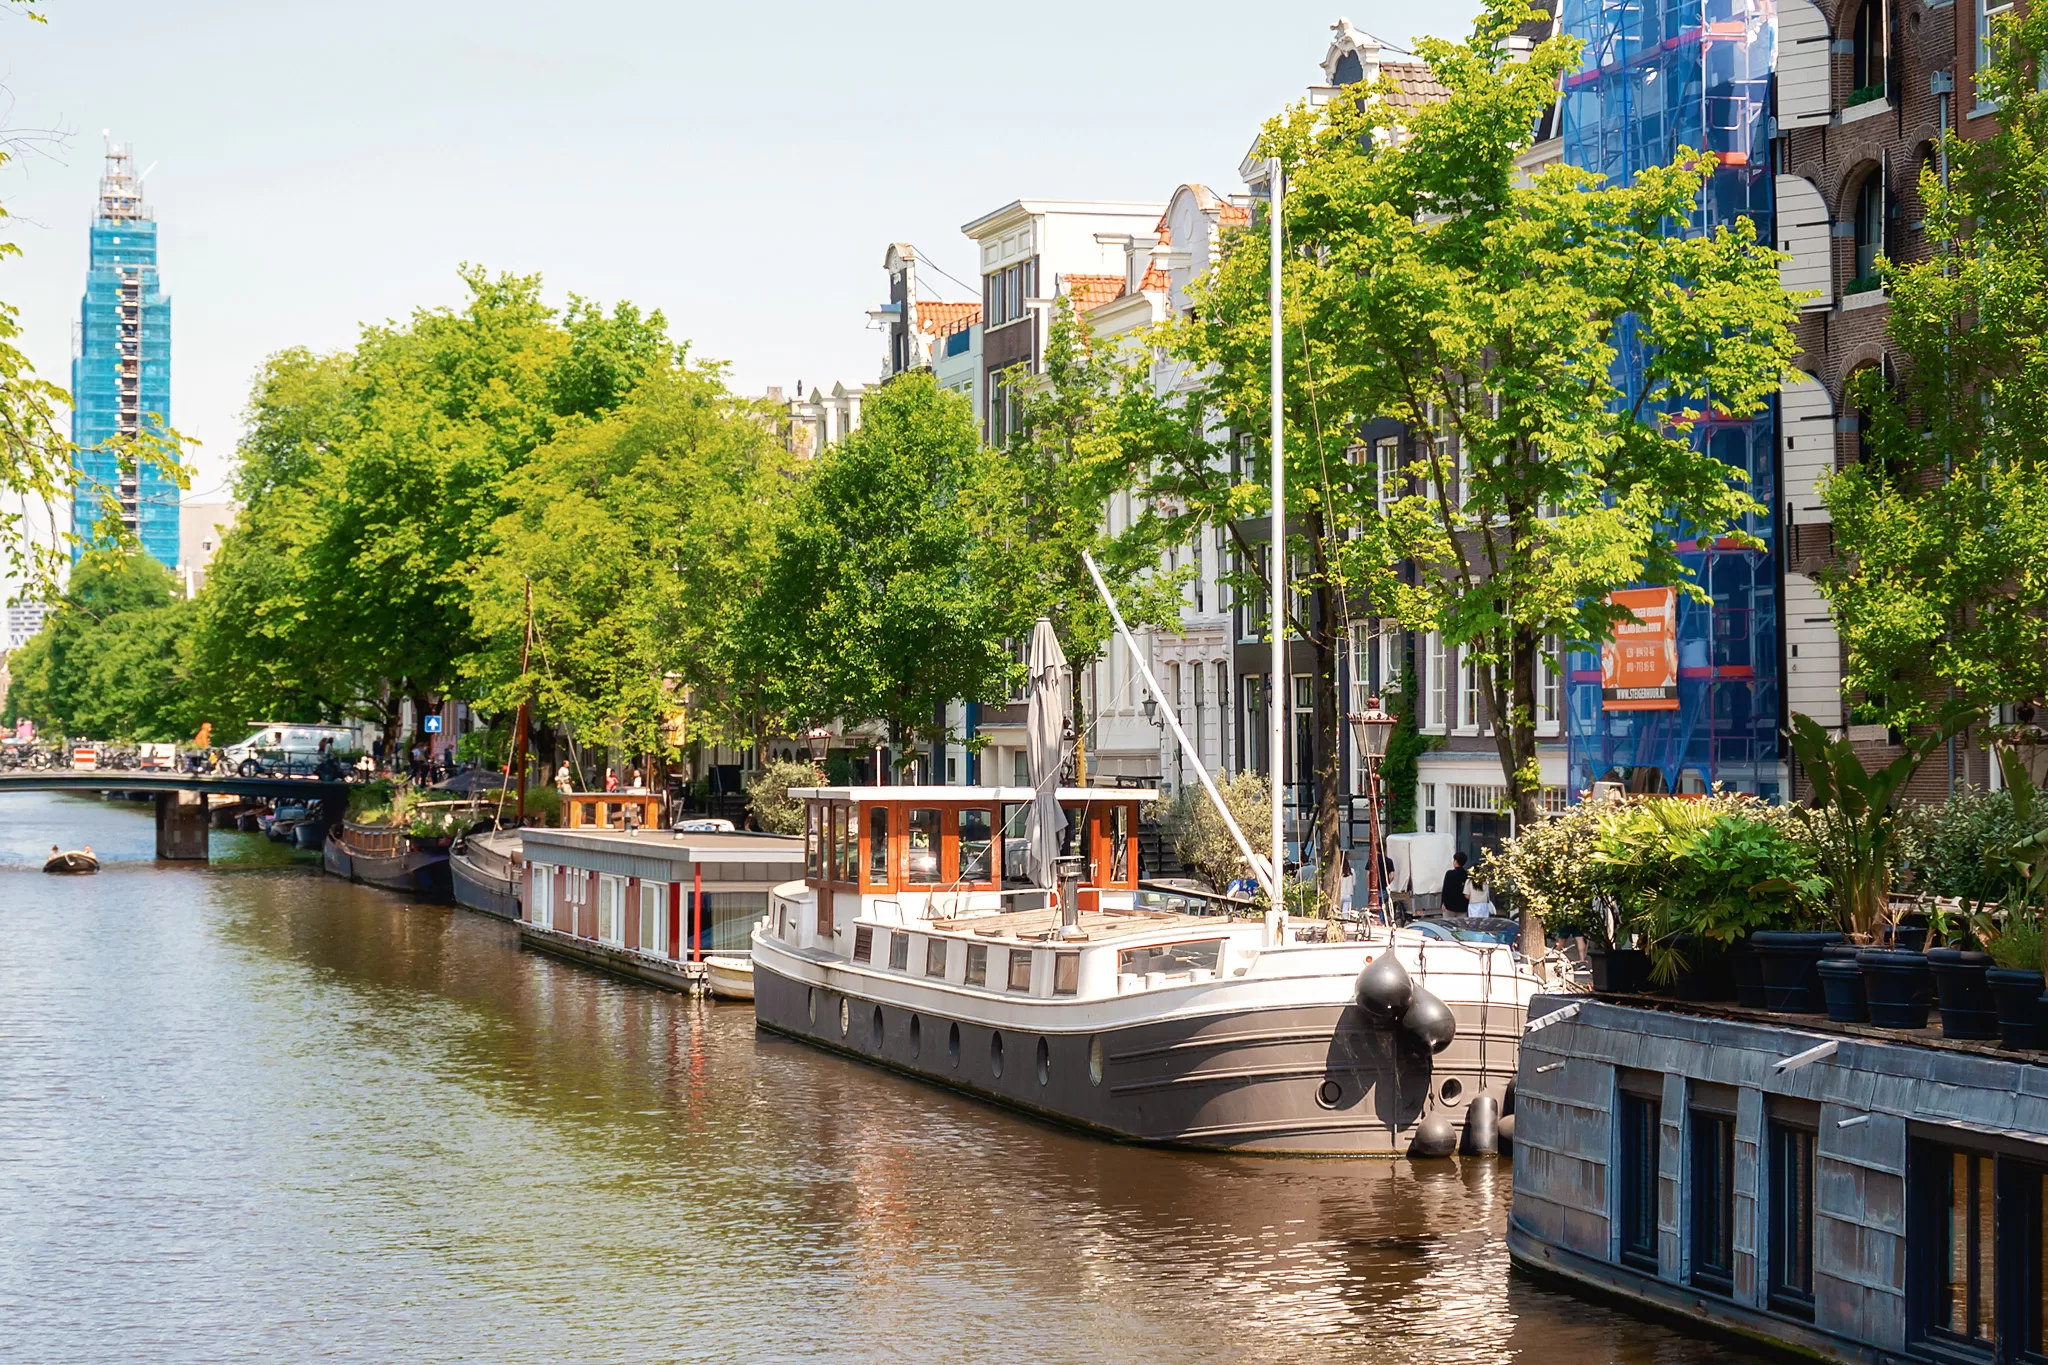 Houseboats in Amsterdam, Netherlands. This blog post shares fun things to do in Amsterdam.